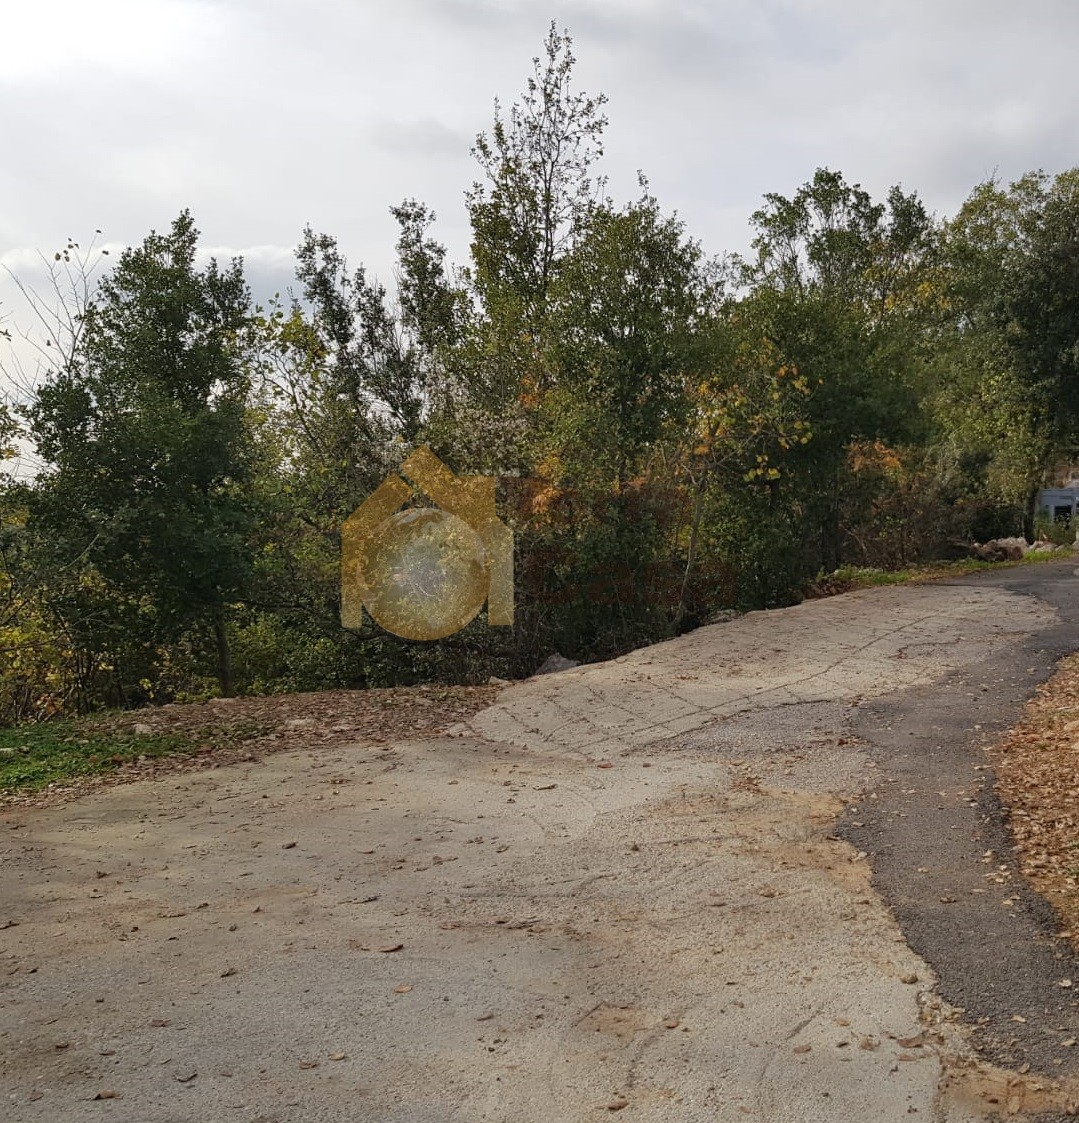 Land for sale in Chahtoul located in calm area  mountain view cash payment